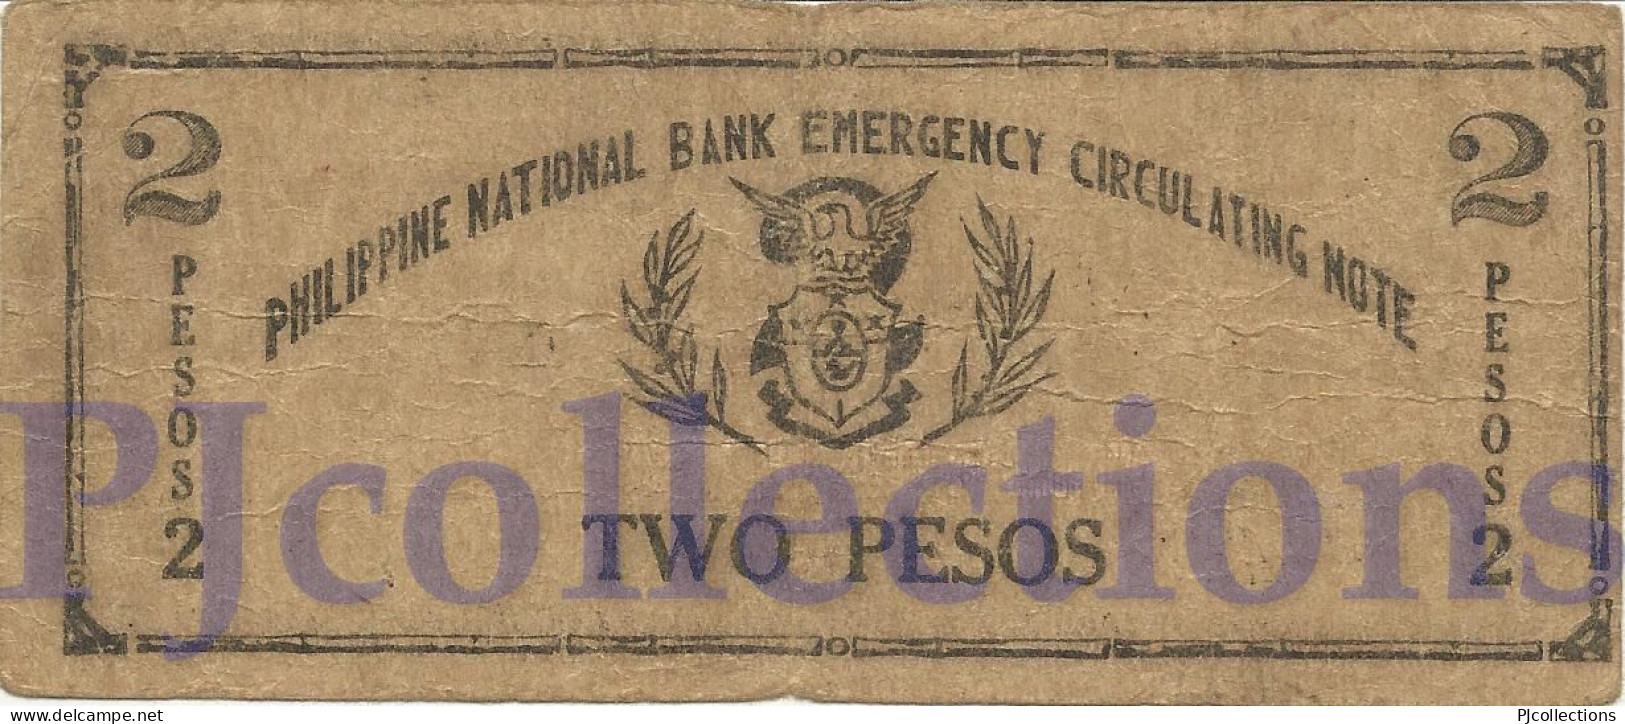 PHILIPPINES 2 PESOS 1942 PICK S577a FINE EMERGENCY NOTE - Filipinas